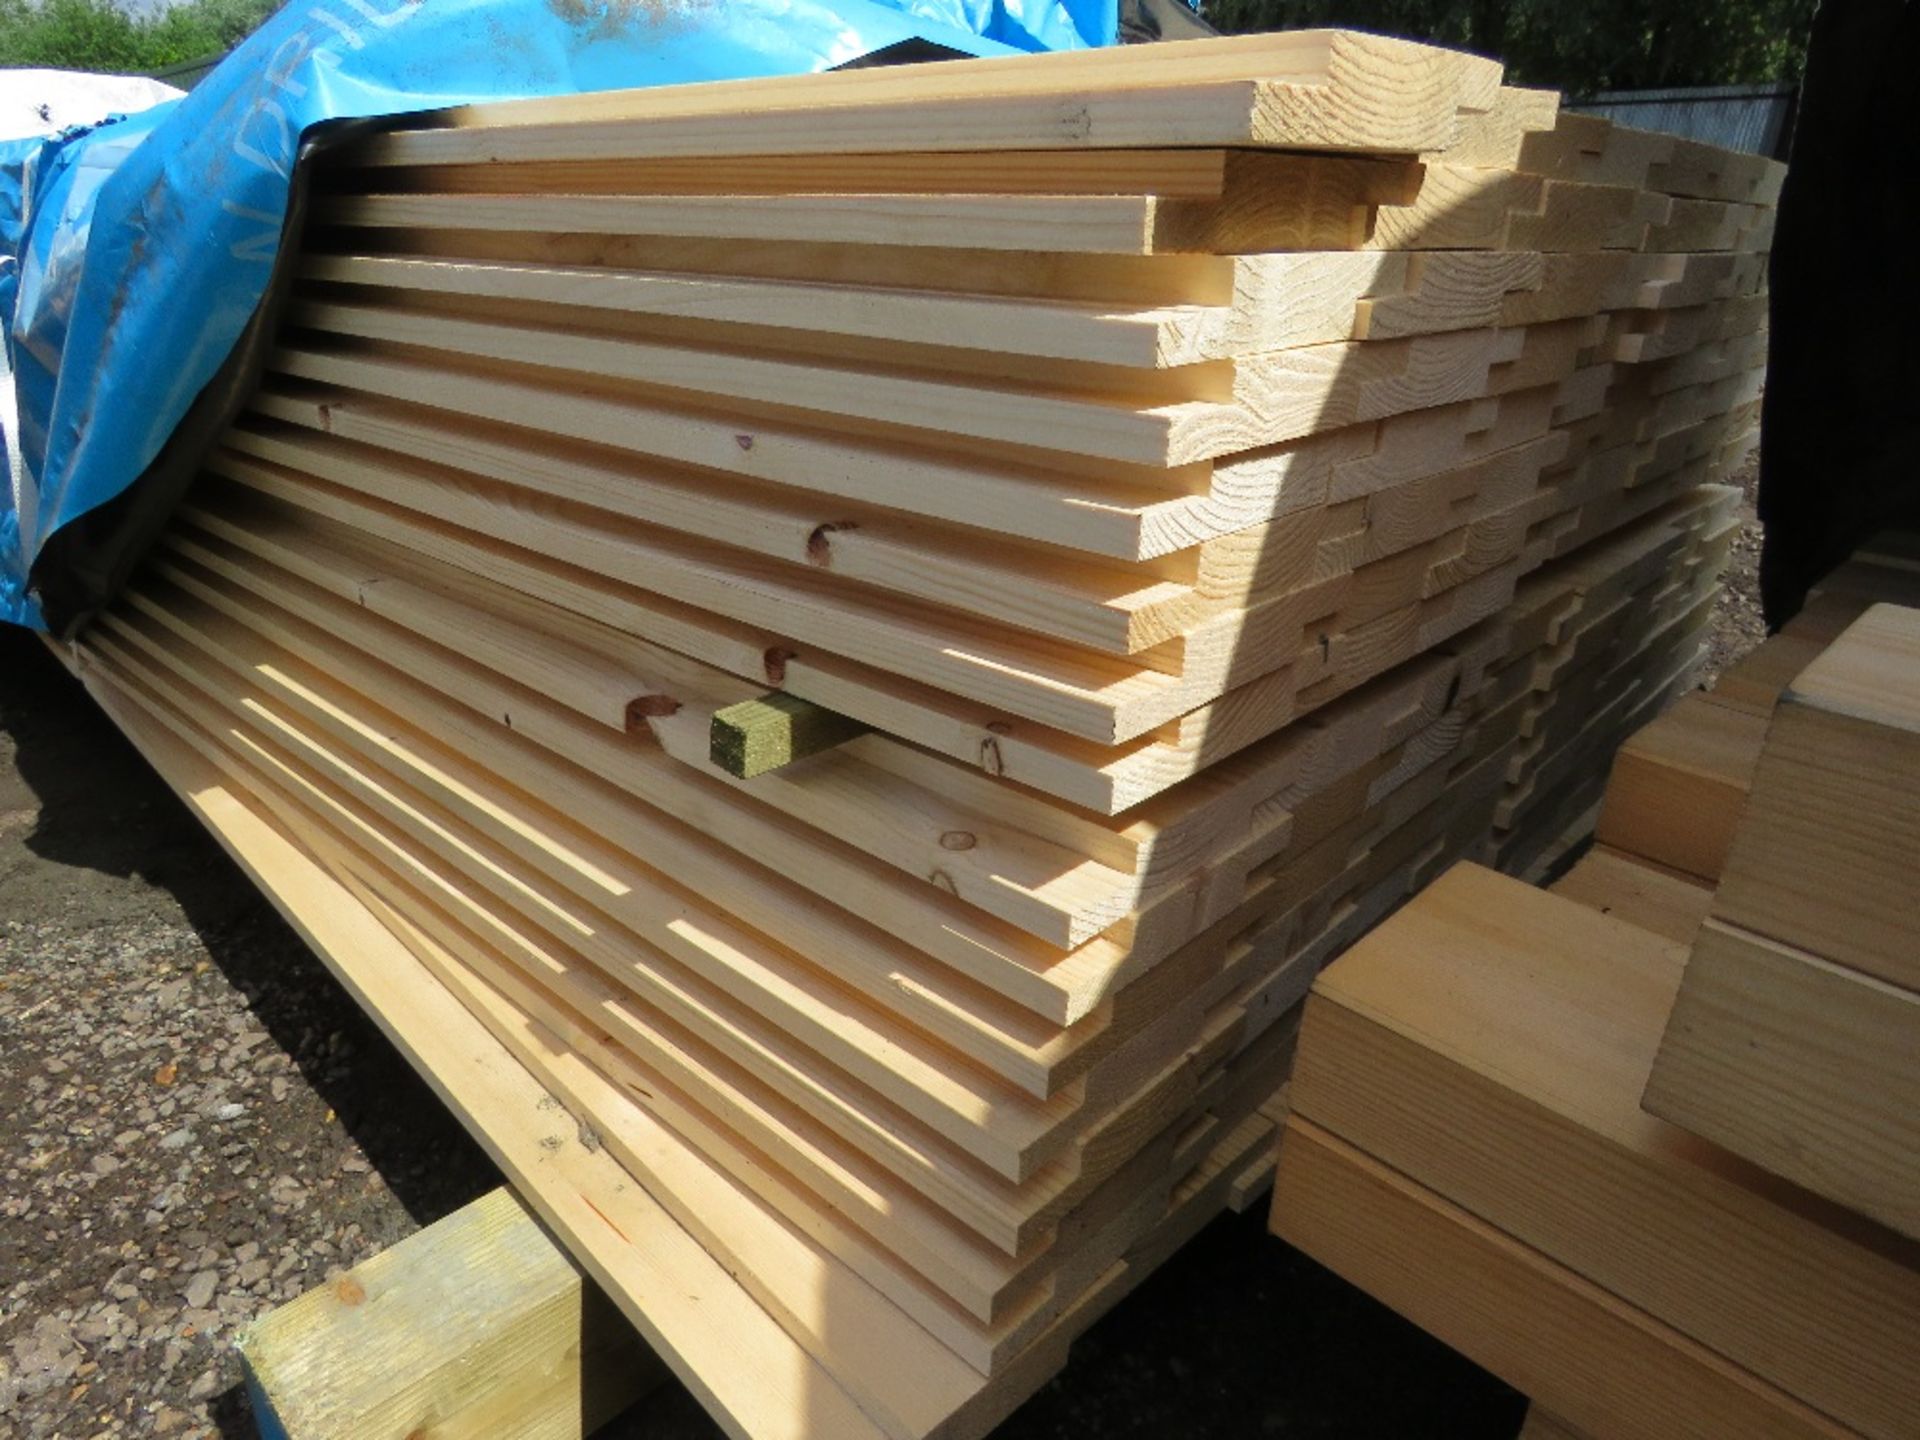 PACK OF HEAVY DUTY INTERLOCKING BOARDS 14CM WIDE X 25MM DEPTH X 1.83M LENGTH APPROX. - Image 3 of 3